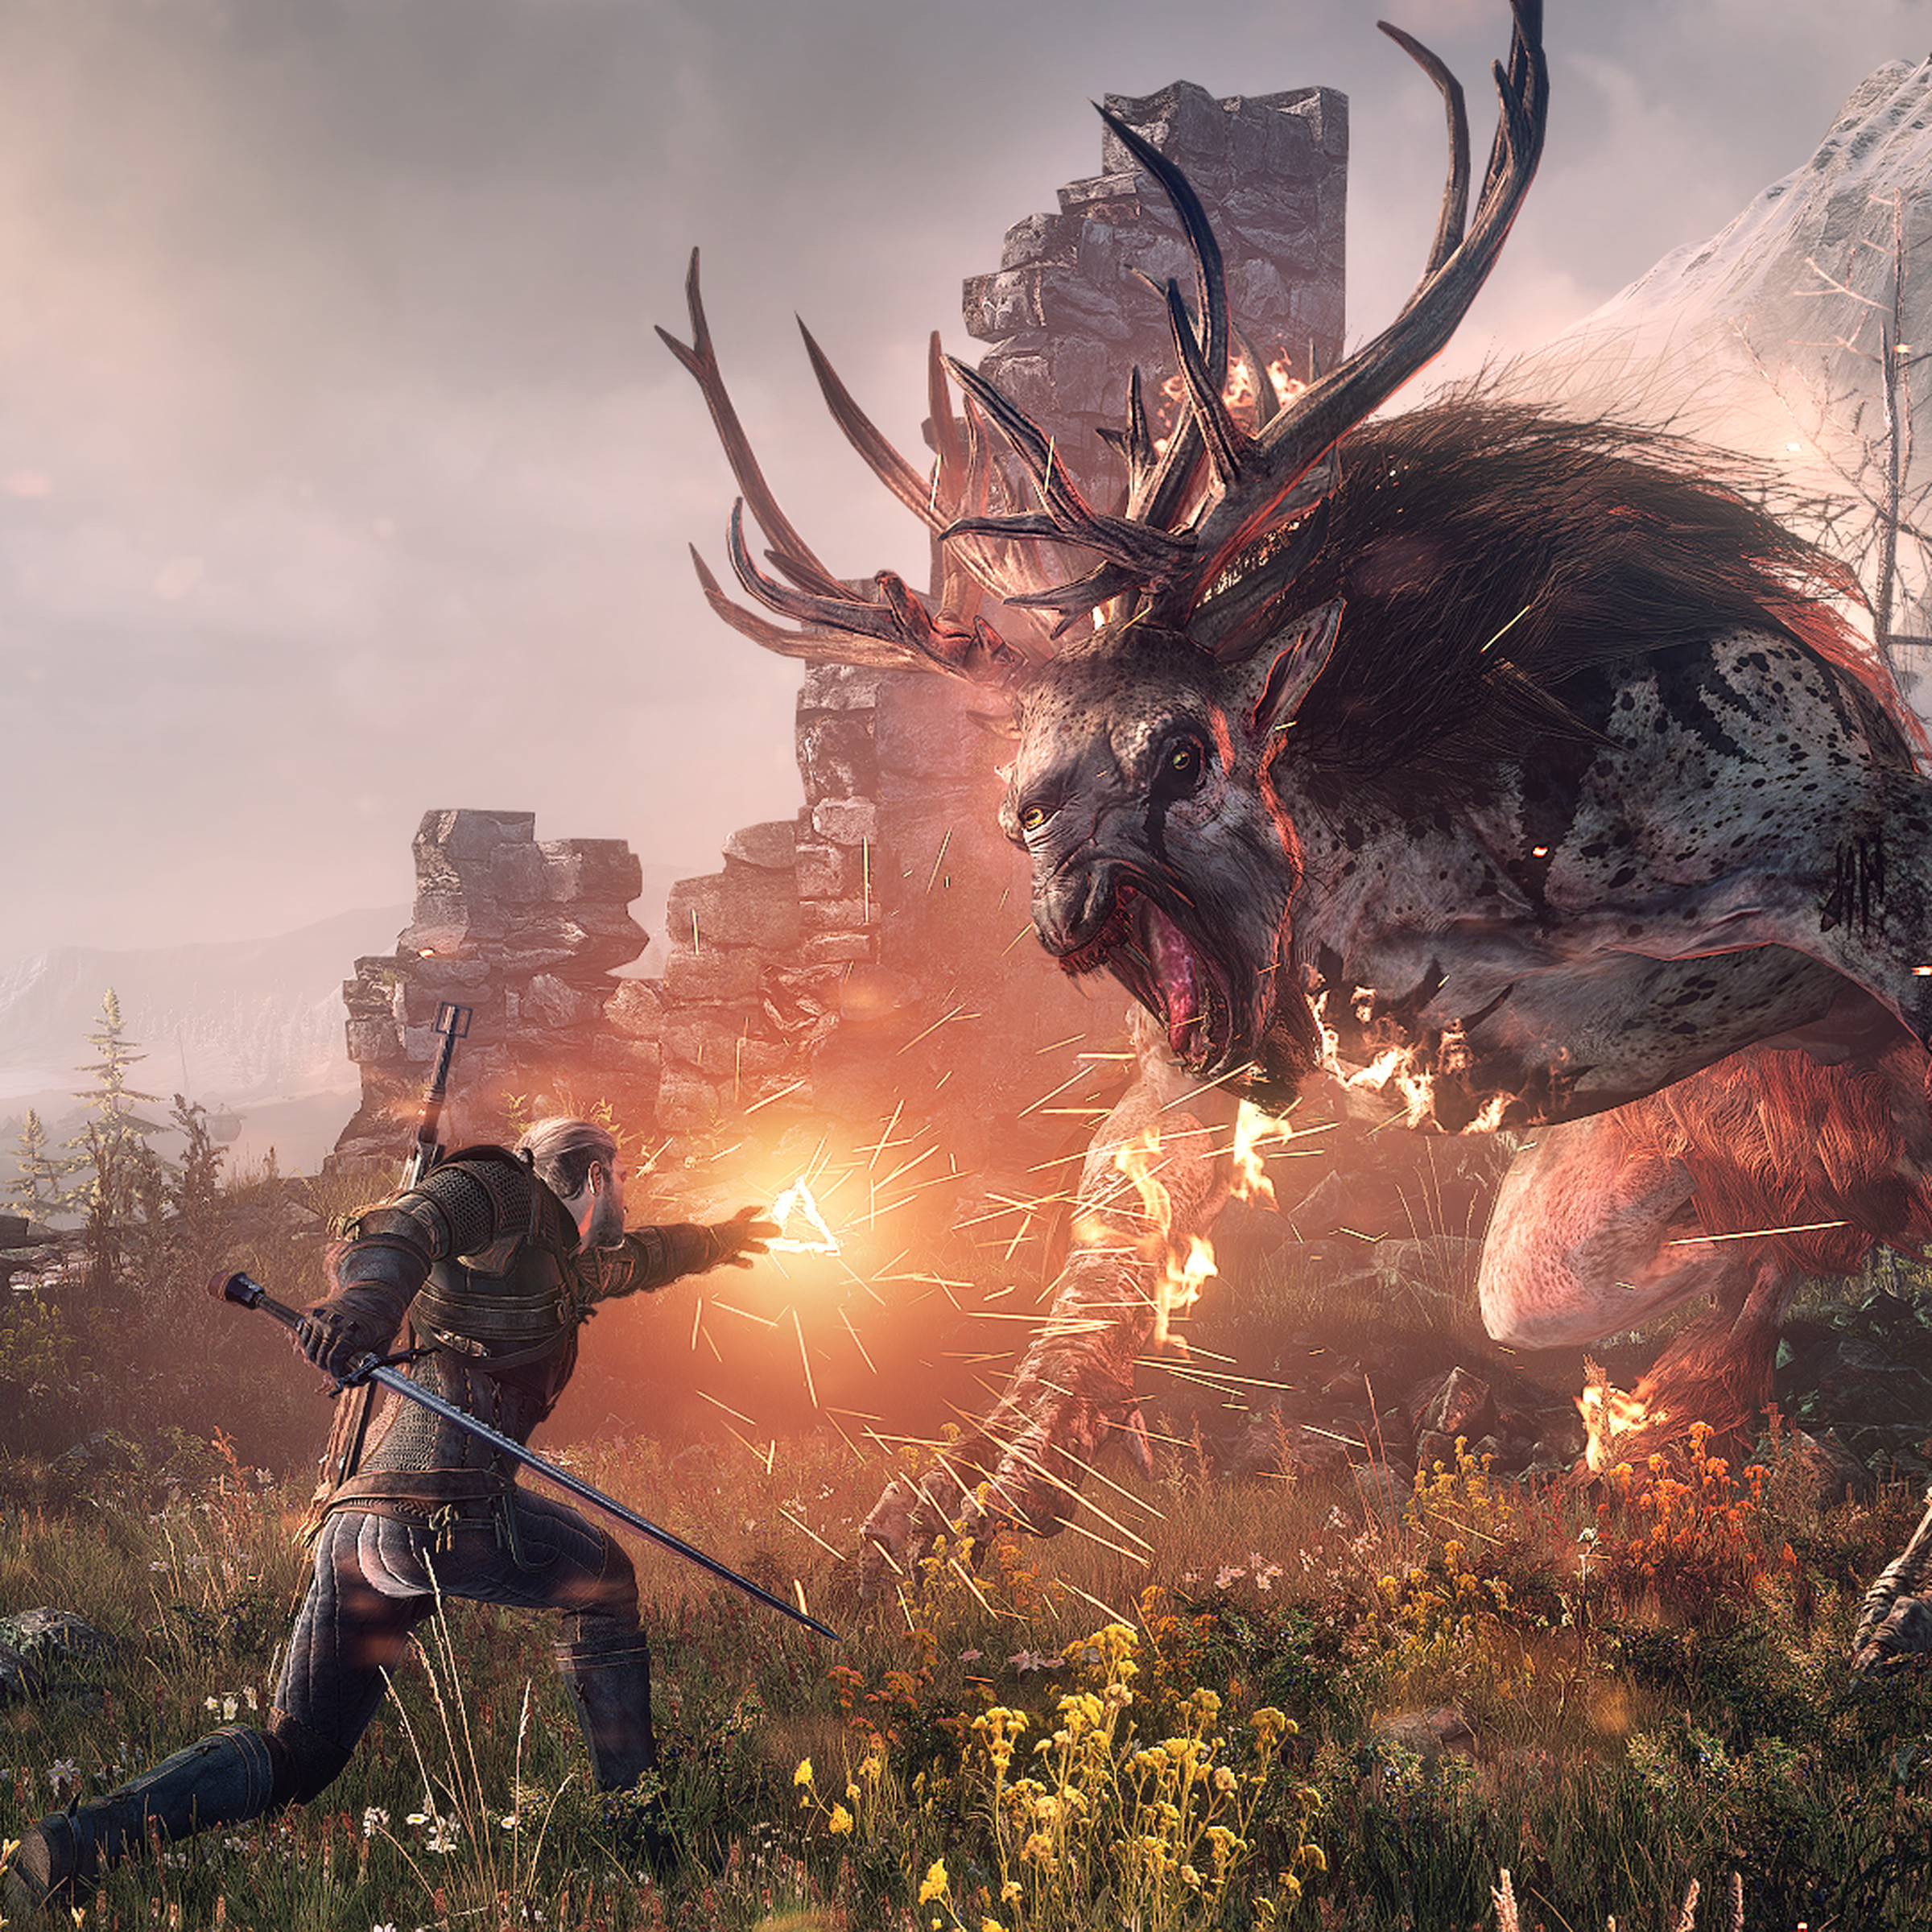 A man in armor faces a huge antlered monster.